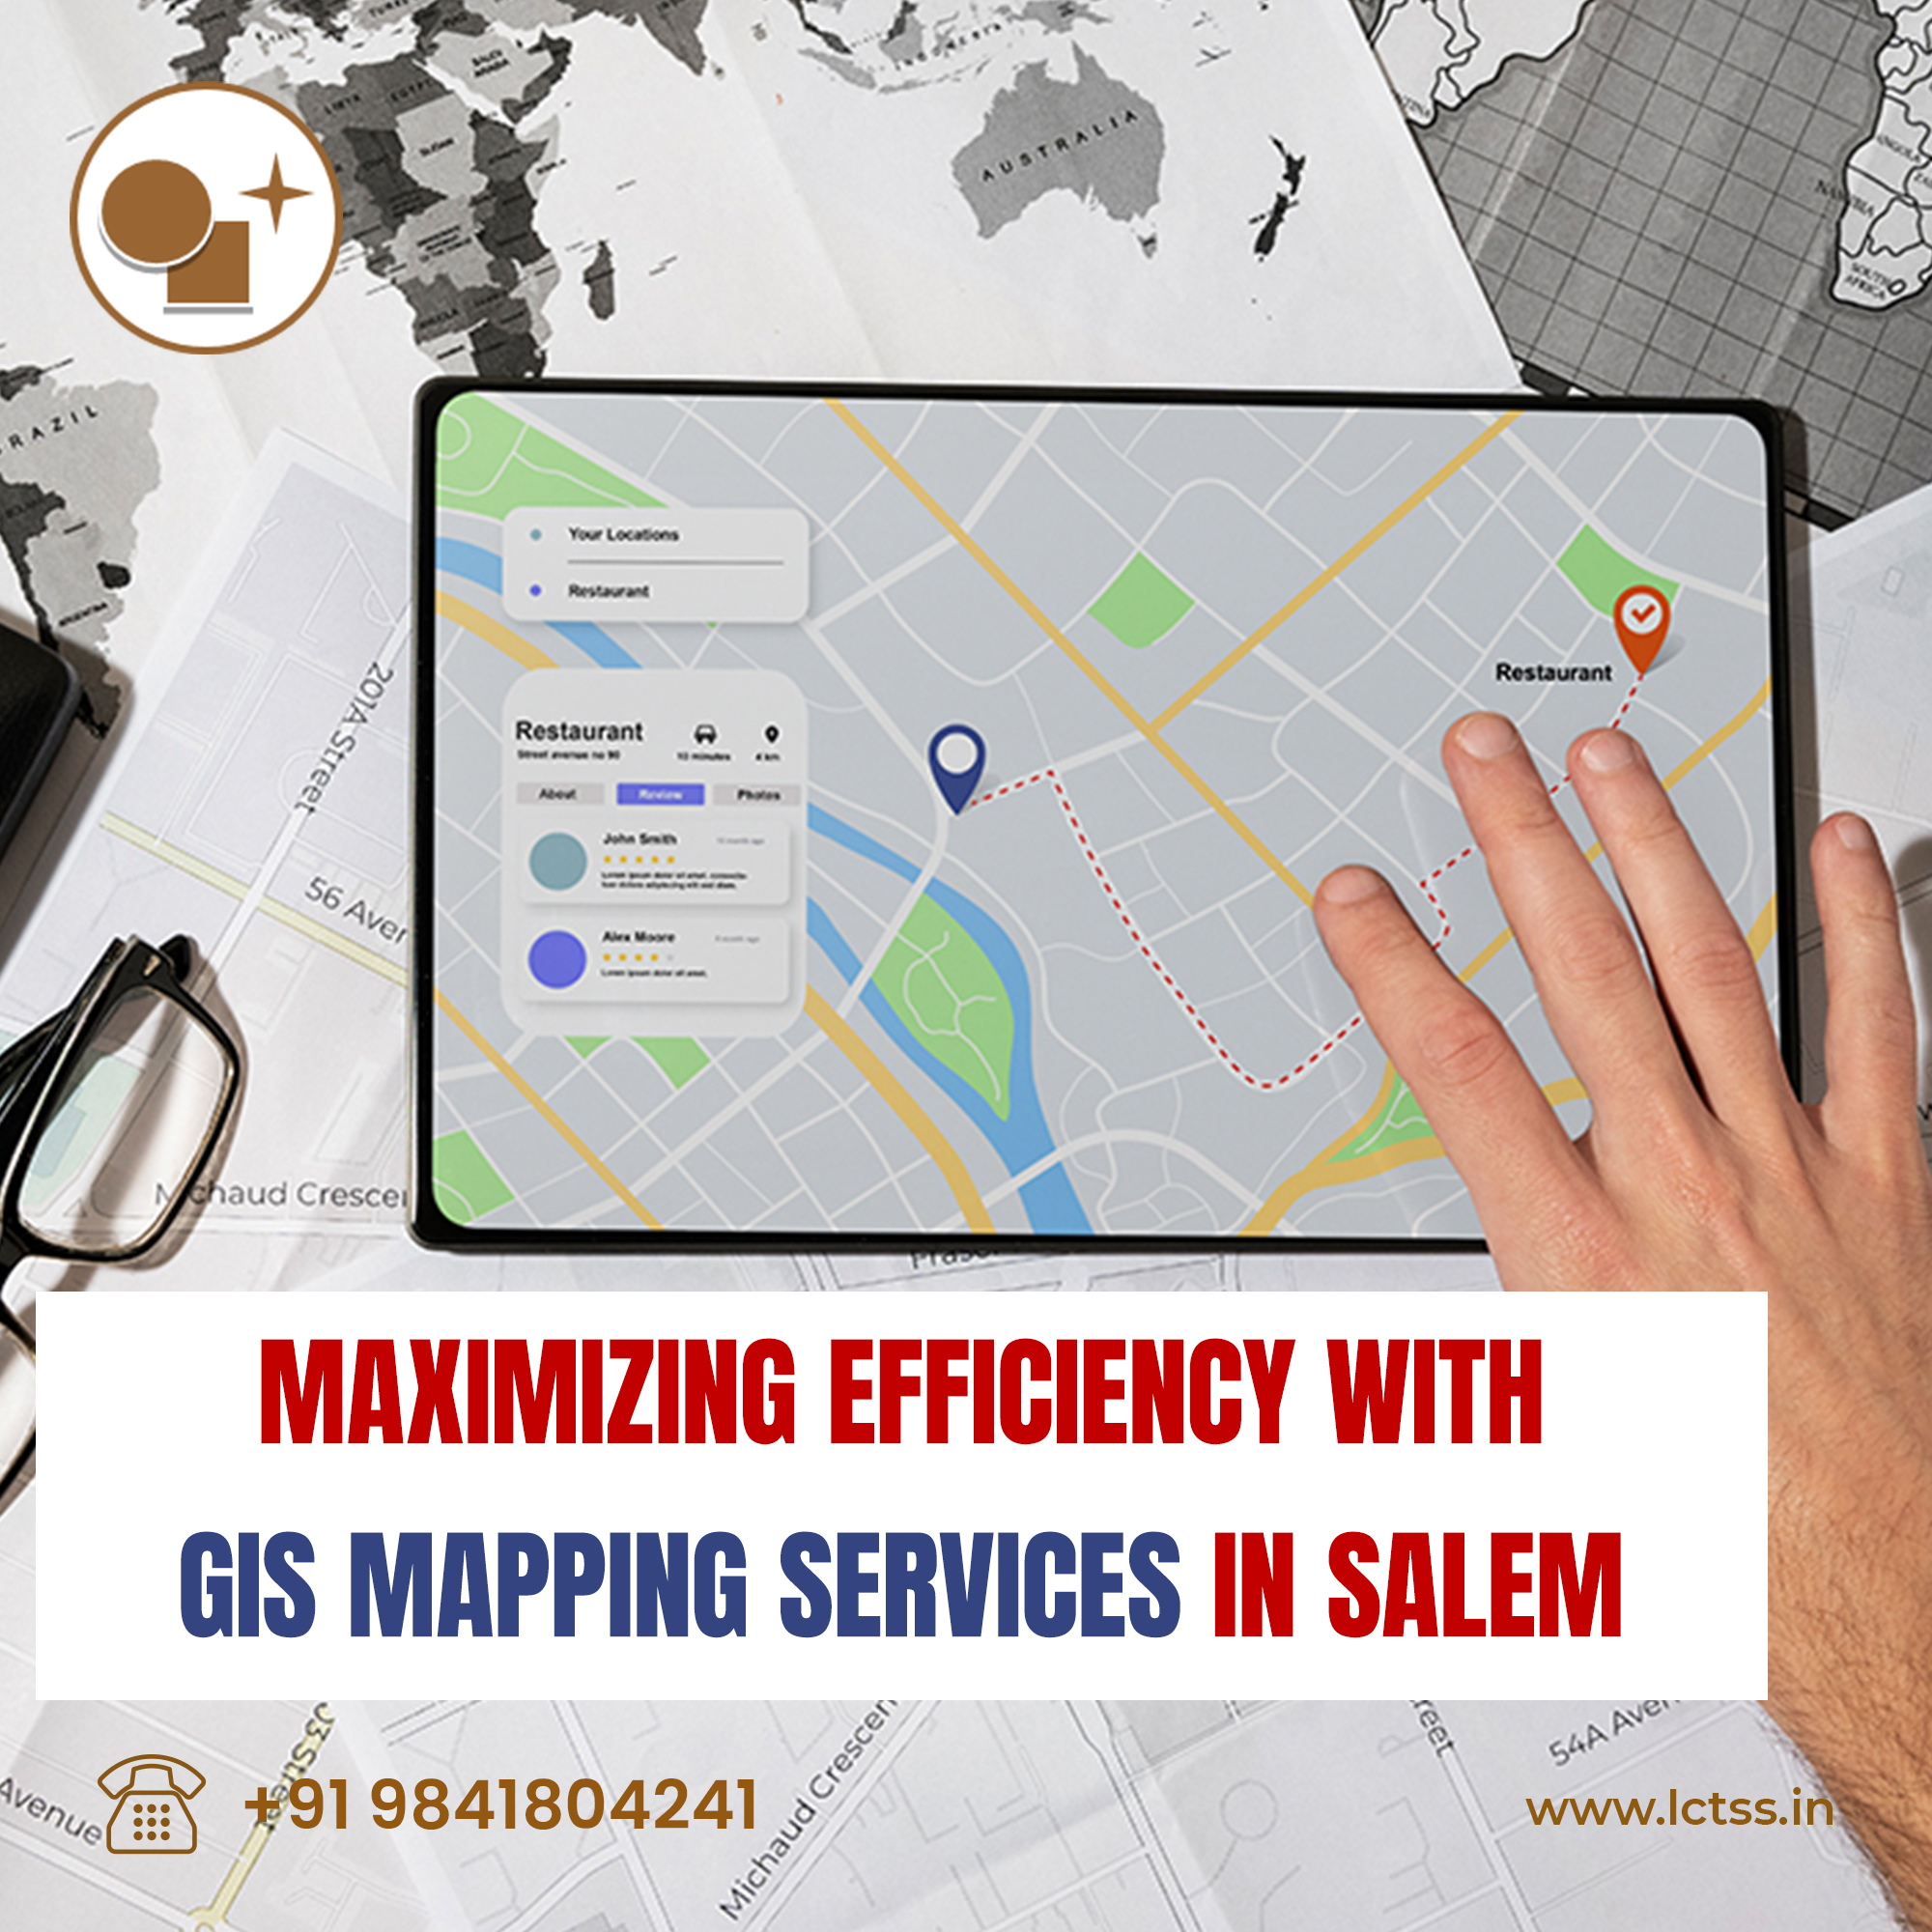 Maximizing Efficiency with GIS Mapping Services in Salem